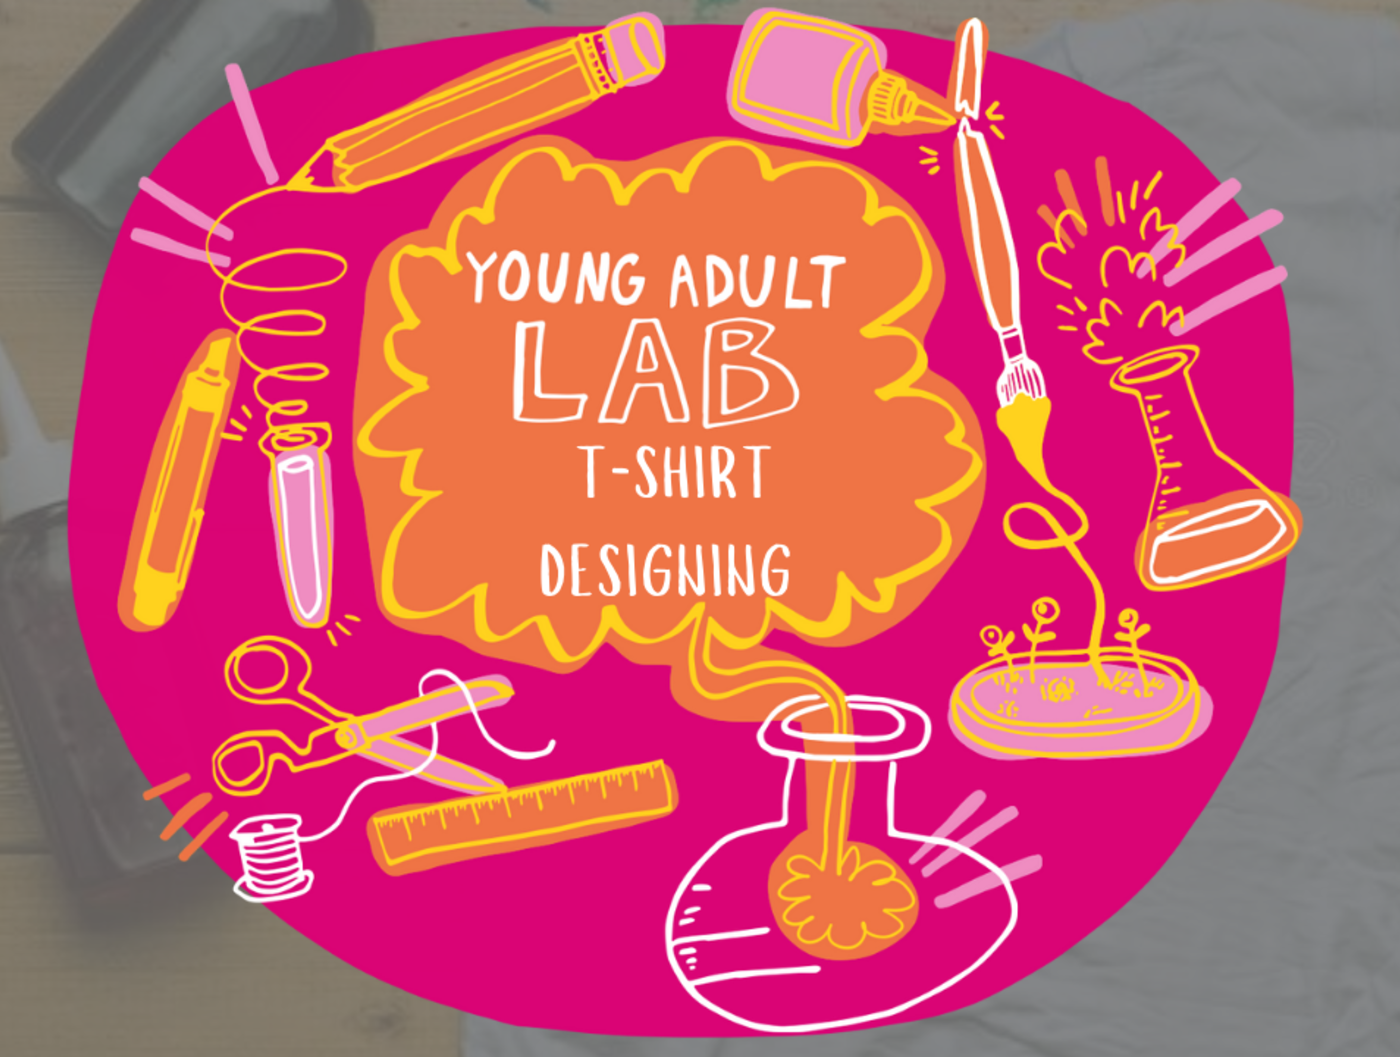 Young Adult Lab: T-Shirt Designing